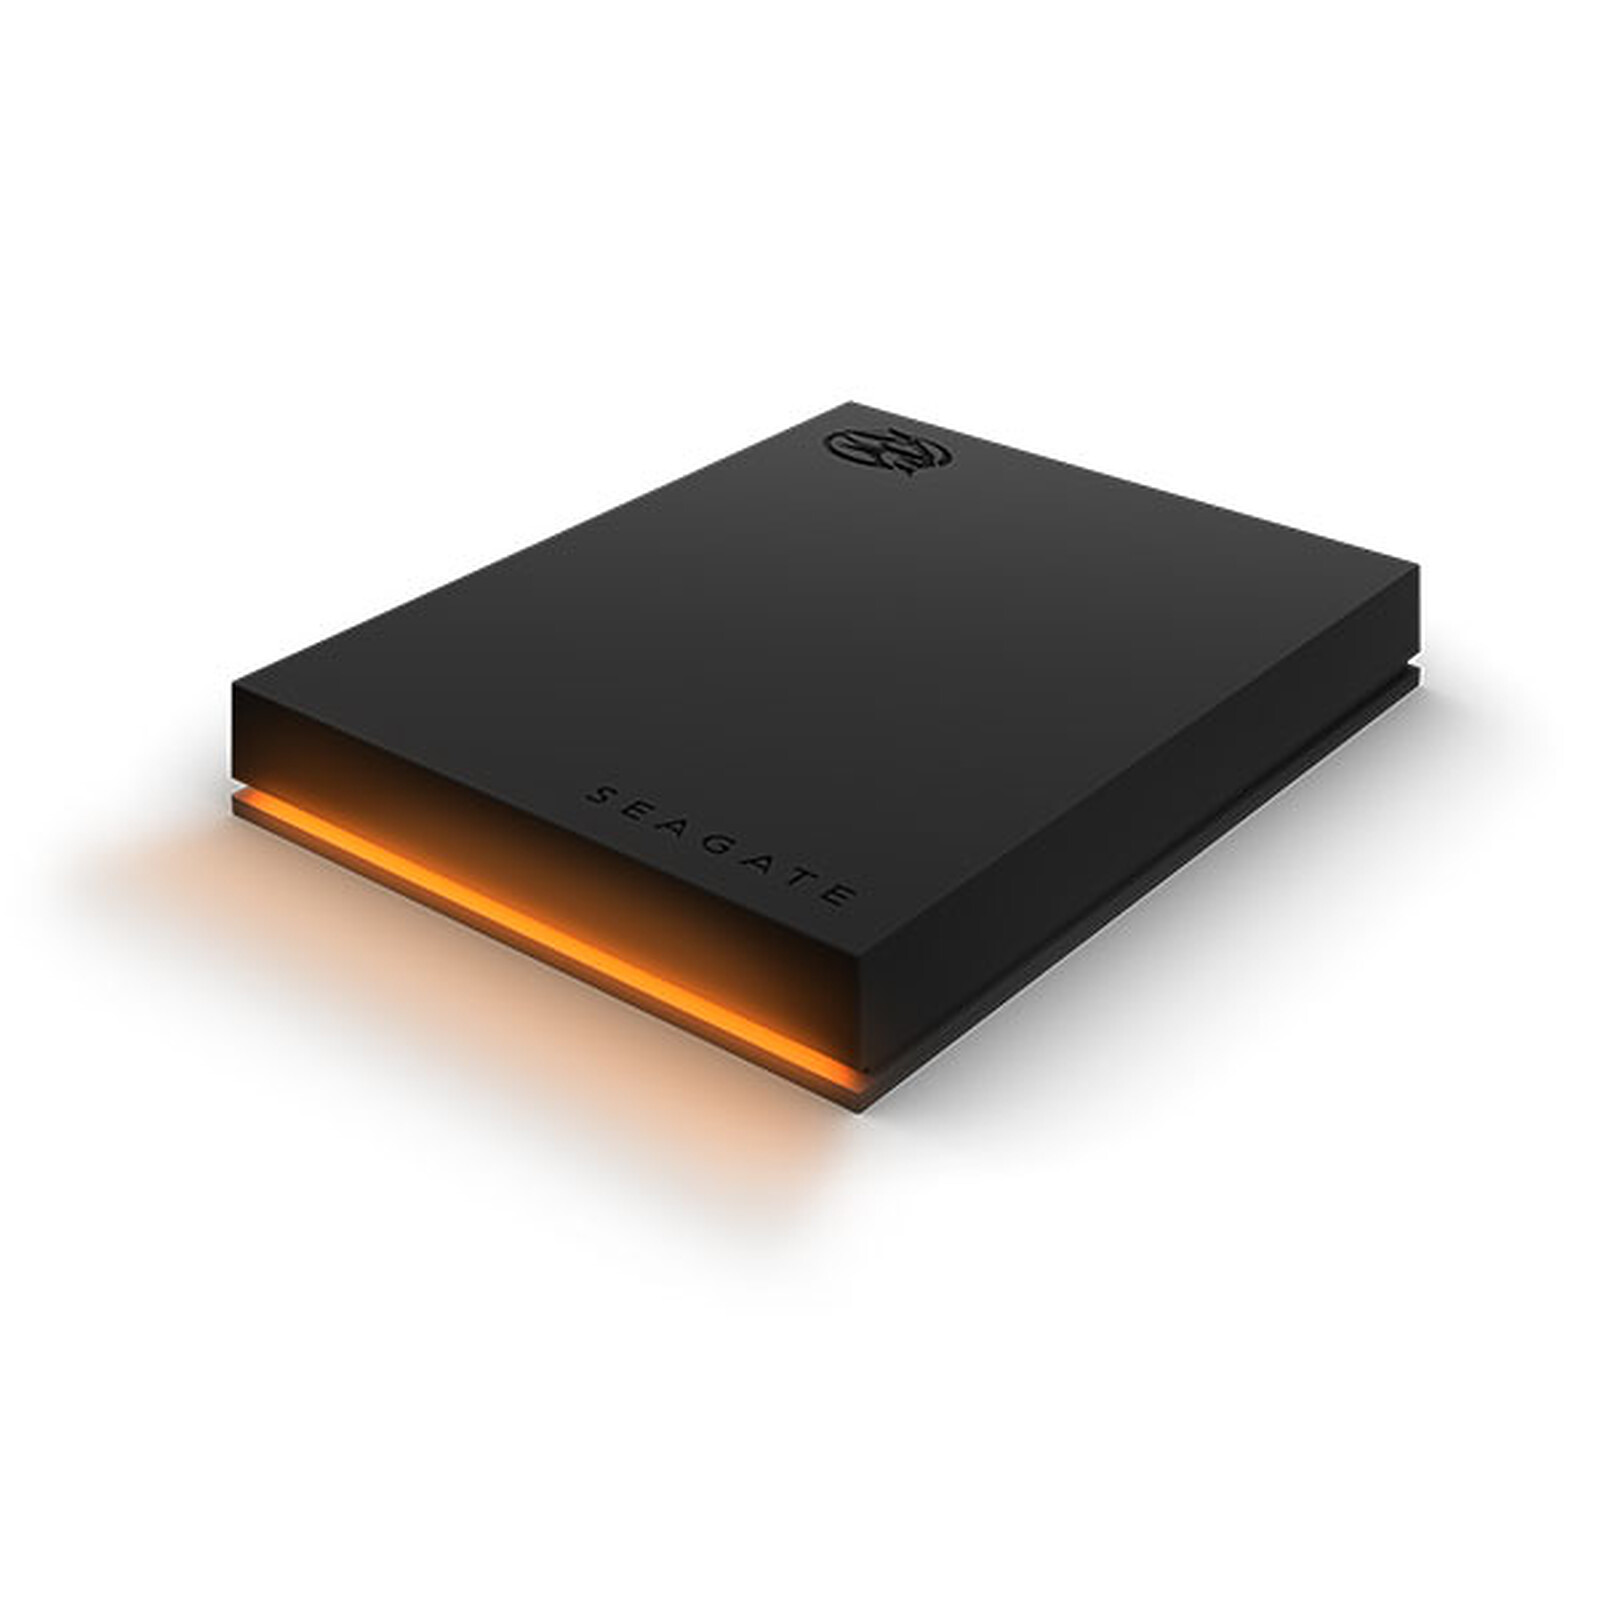 Disque Dur Externe Seagate 2TO